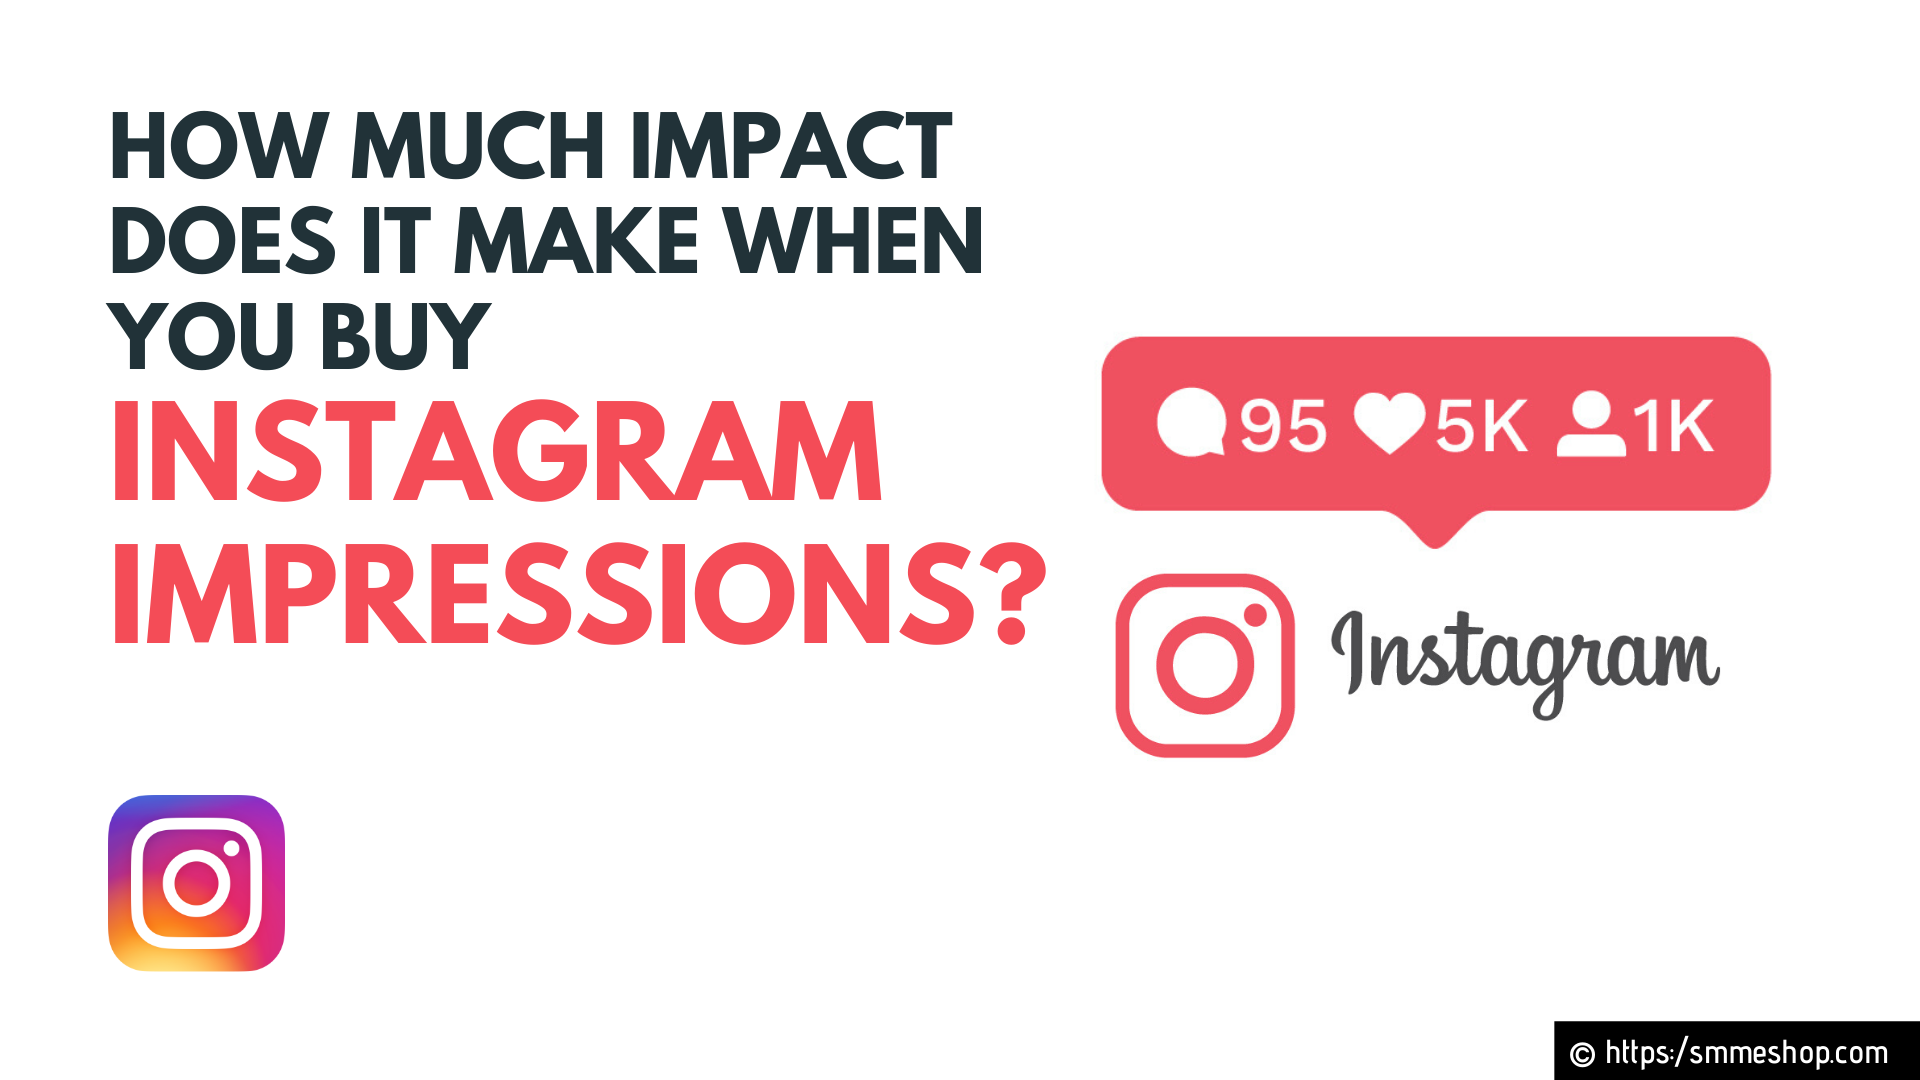 How much Impact does it make when you Buy Instagram Impressions?